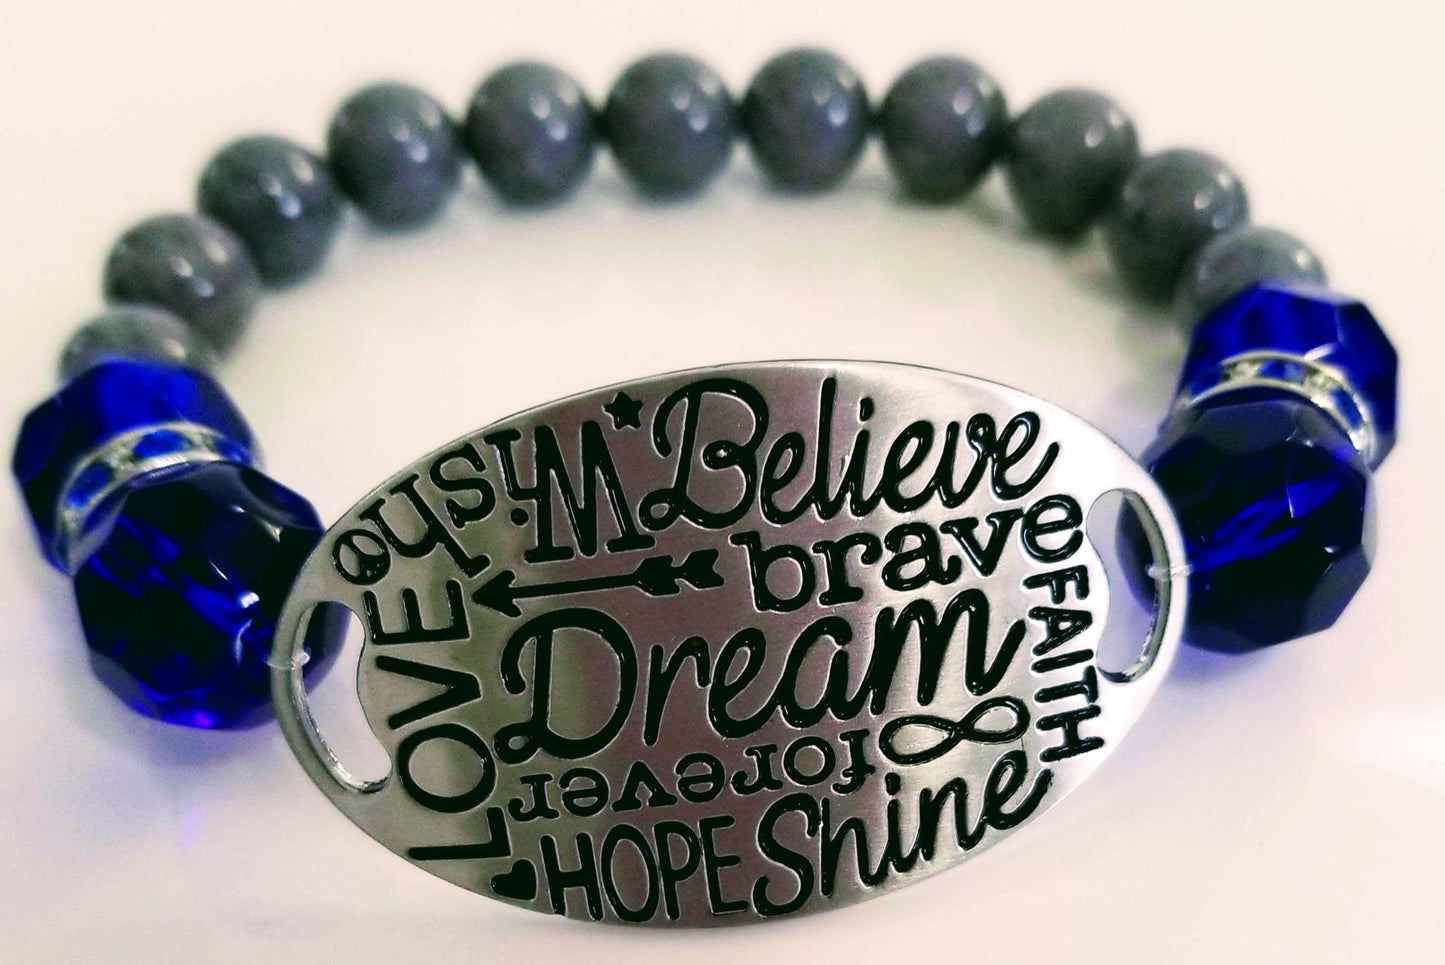 Handcrafted Jewelry By Teri C Stamped Bracelet Speak Your Words Collections Bracelet